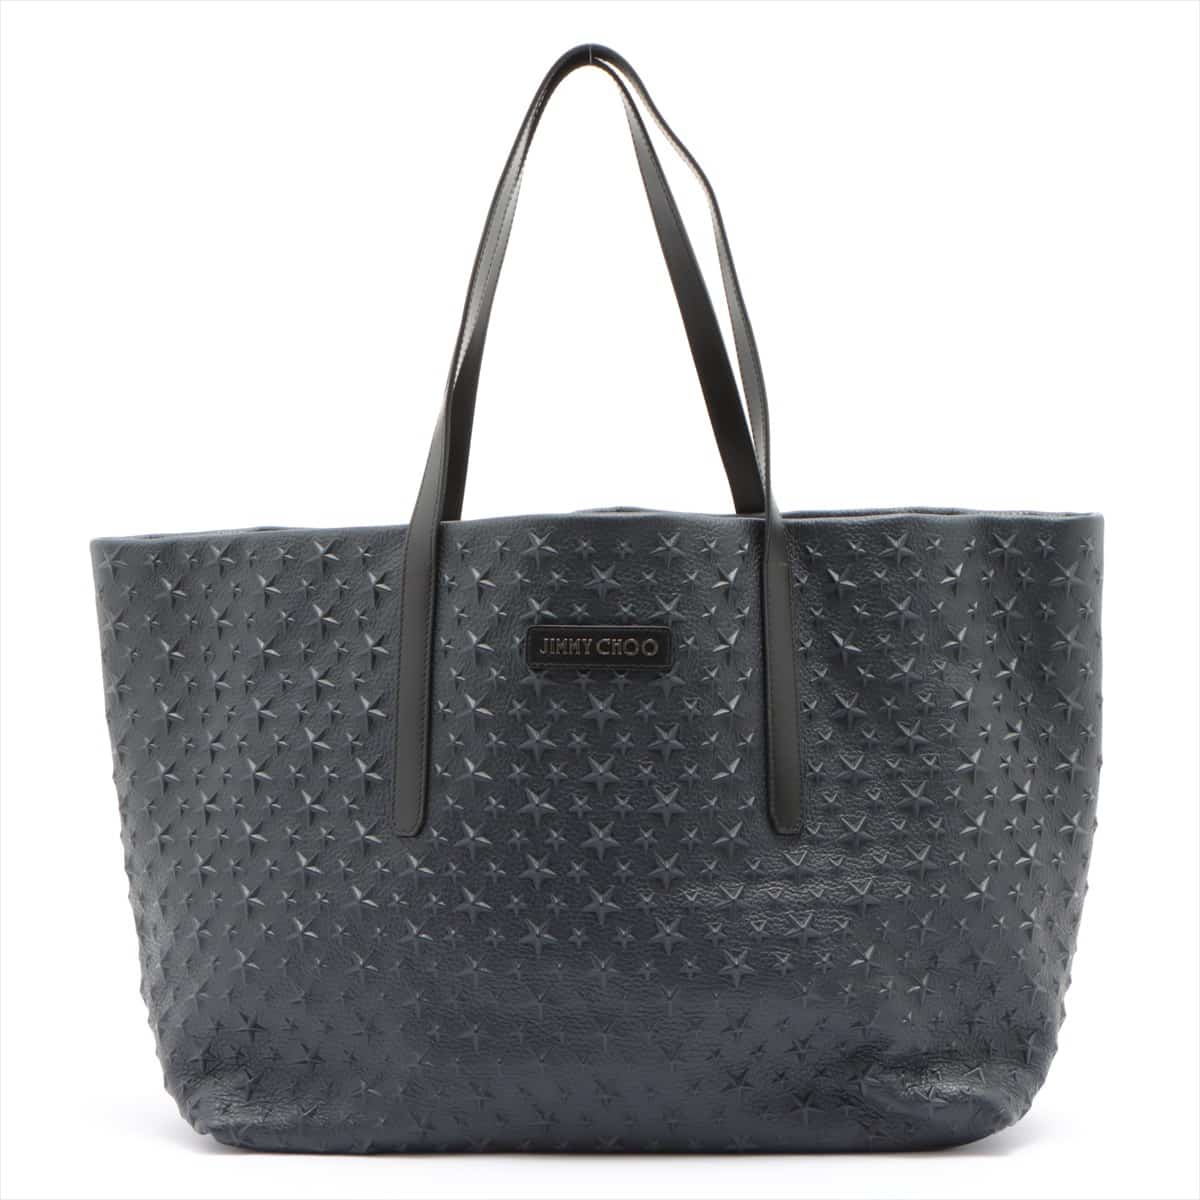 Jimmy Choo Star Emboss Pimlico Leather Tote bag Navy blue